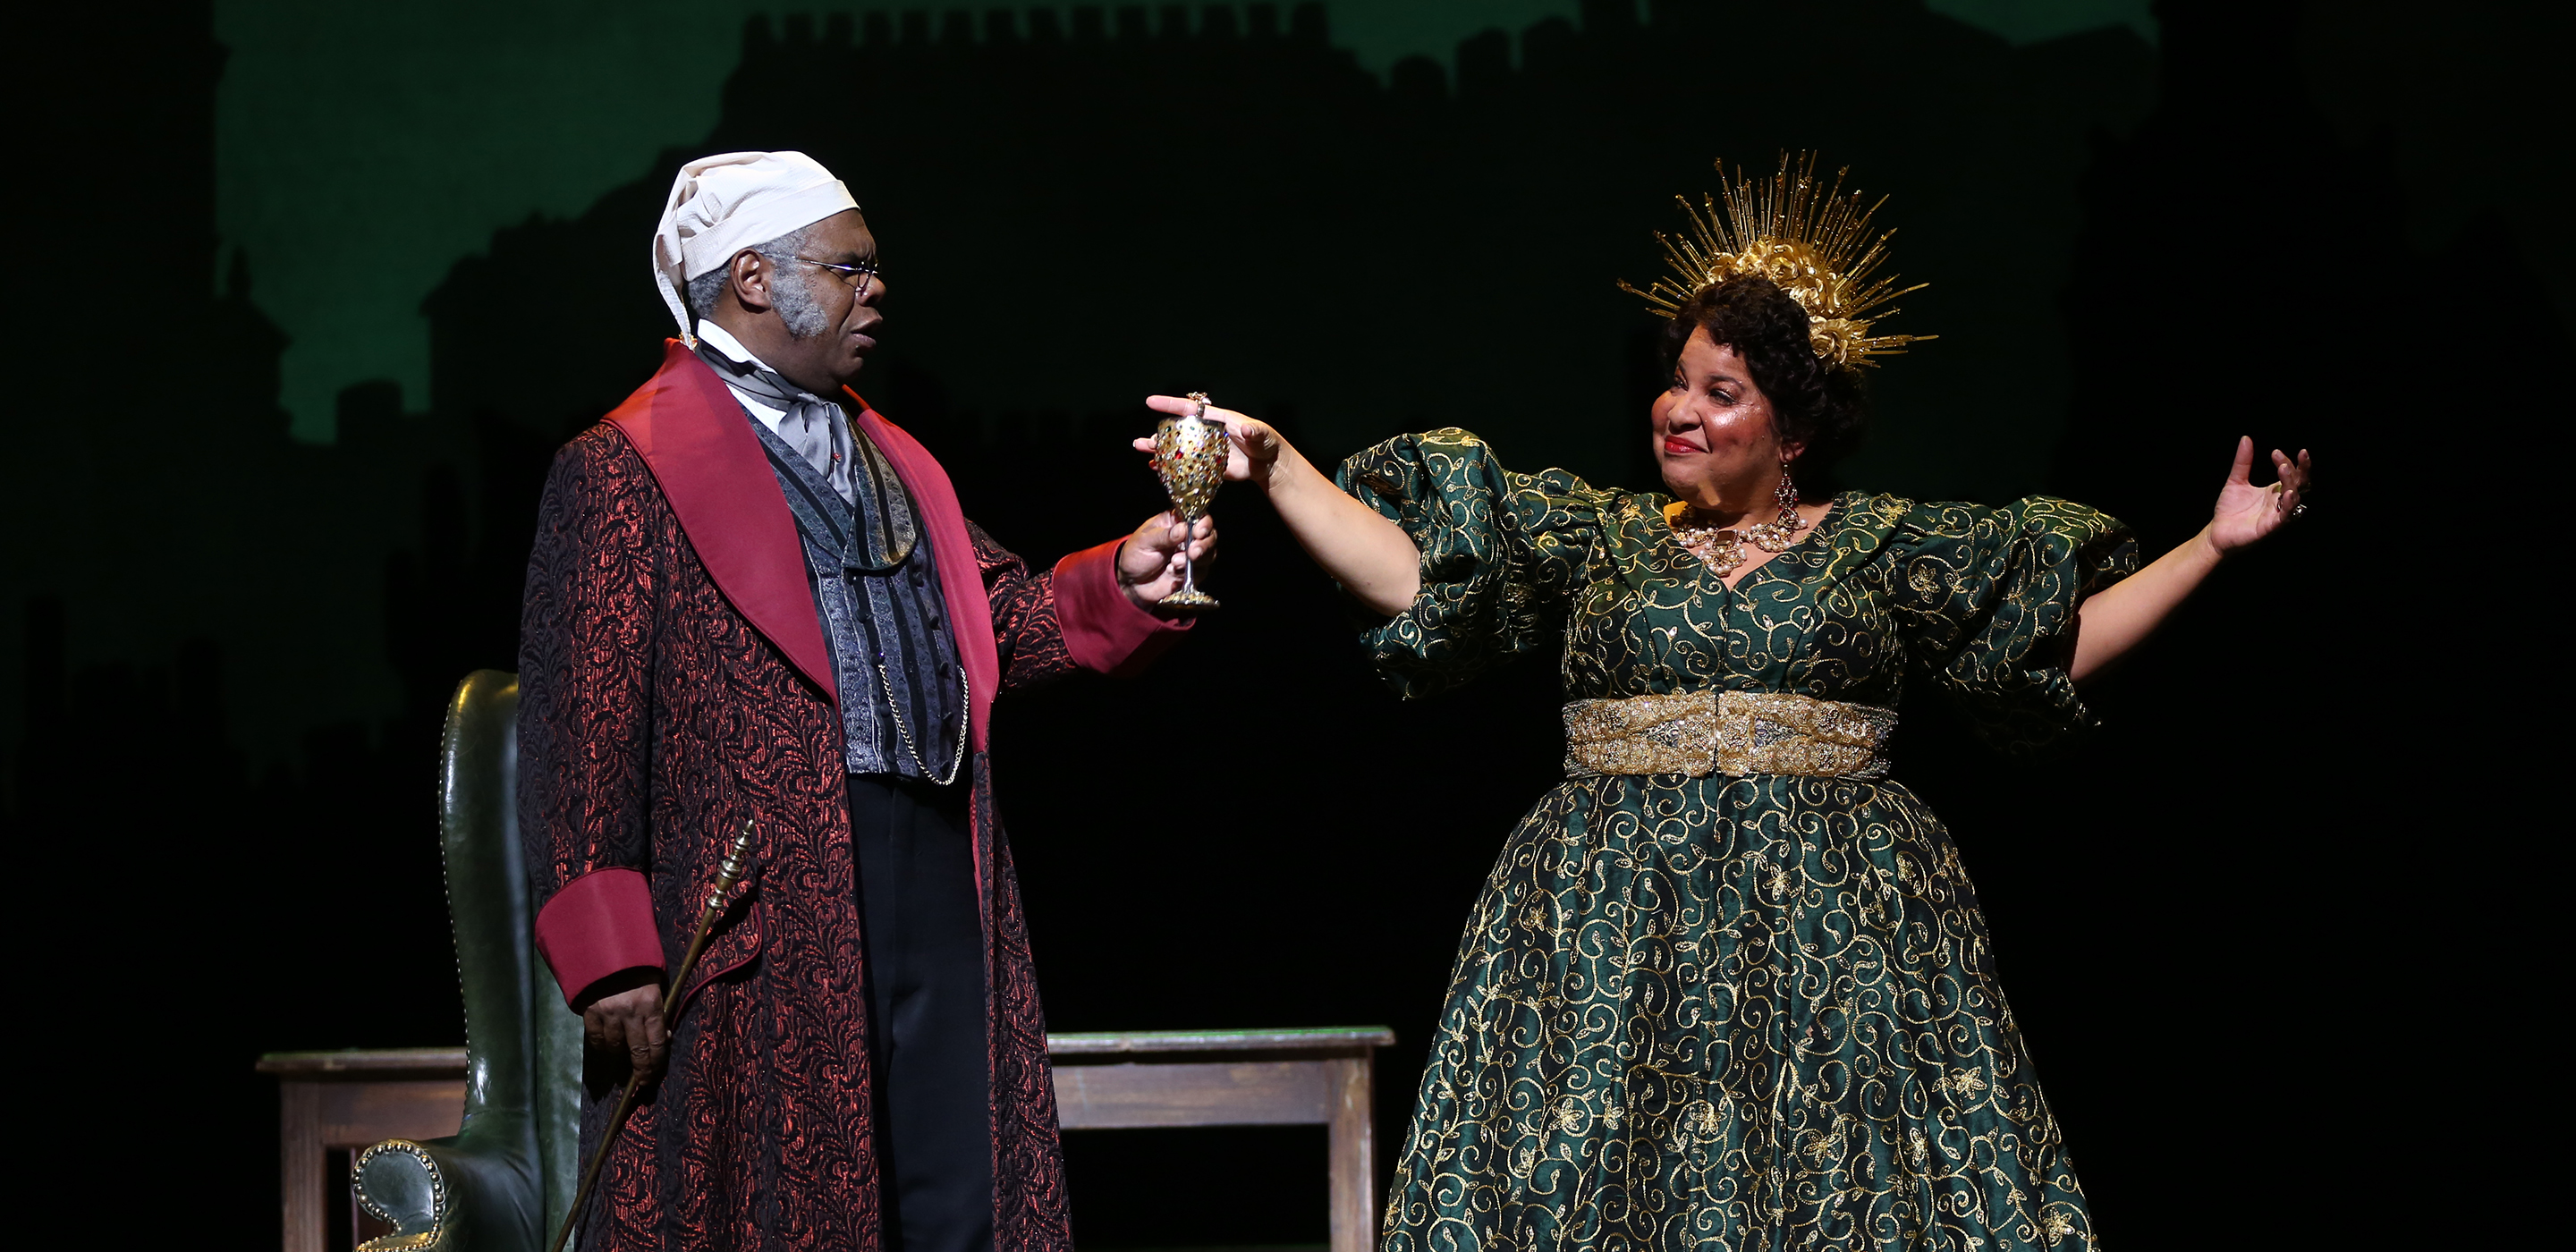 A man dressed in a Victorian robe and nightcap holds a gold goblet in a toast. He stands next to woman dressed as Spirit of Christmas Present in a richly decorated green Victorian-style dress and sunburst crown.